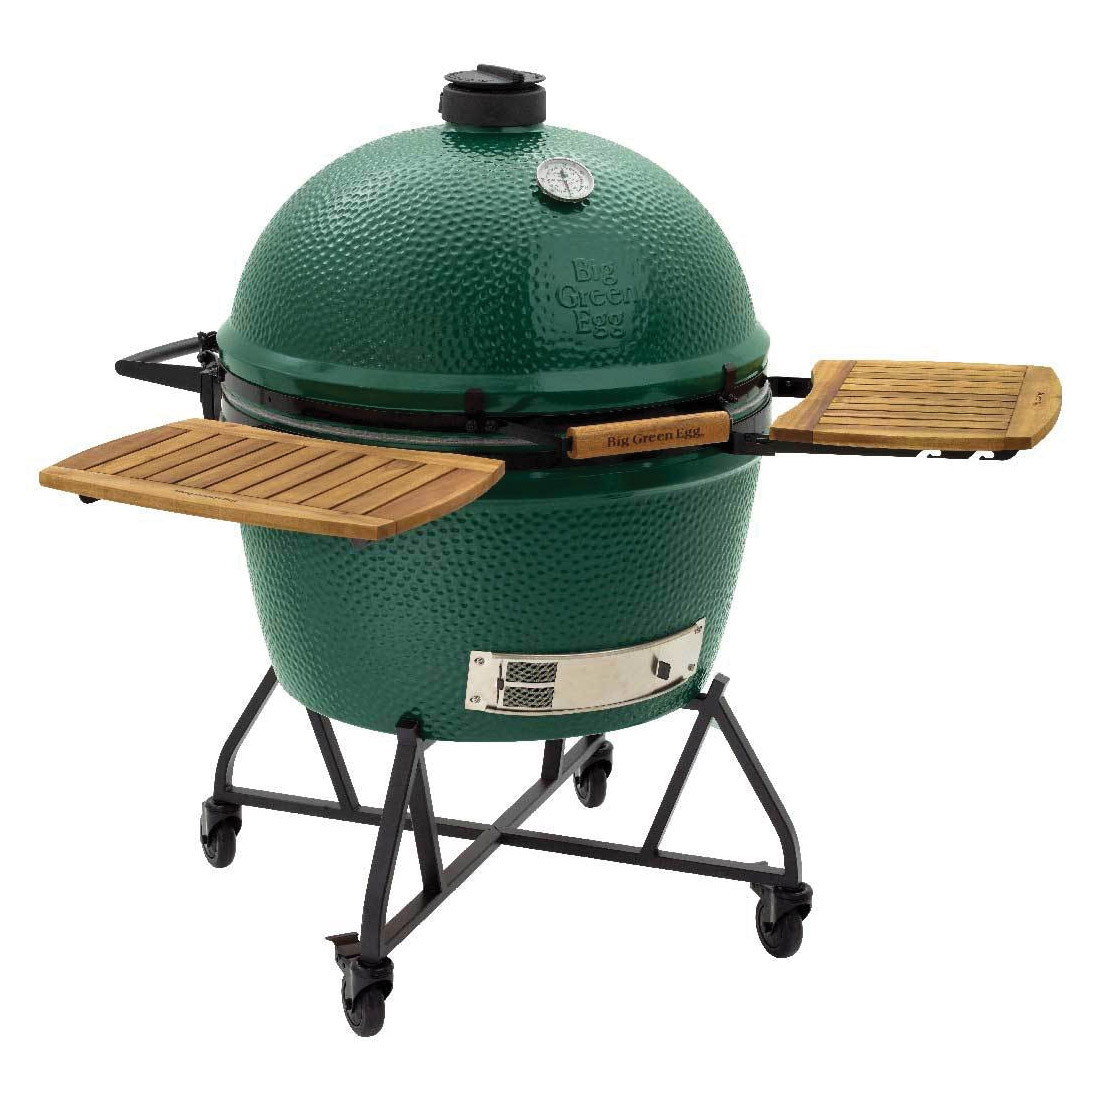 Big Green Egg 126467 Grill Cover, Fabric - 2